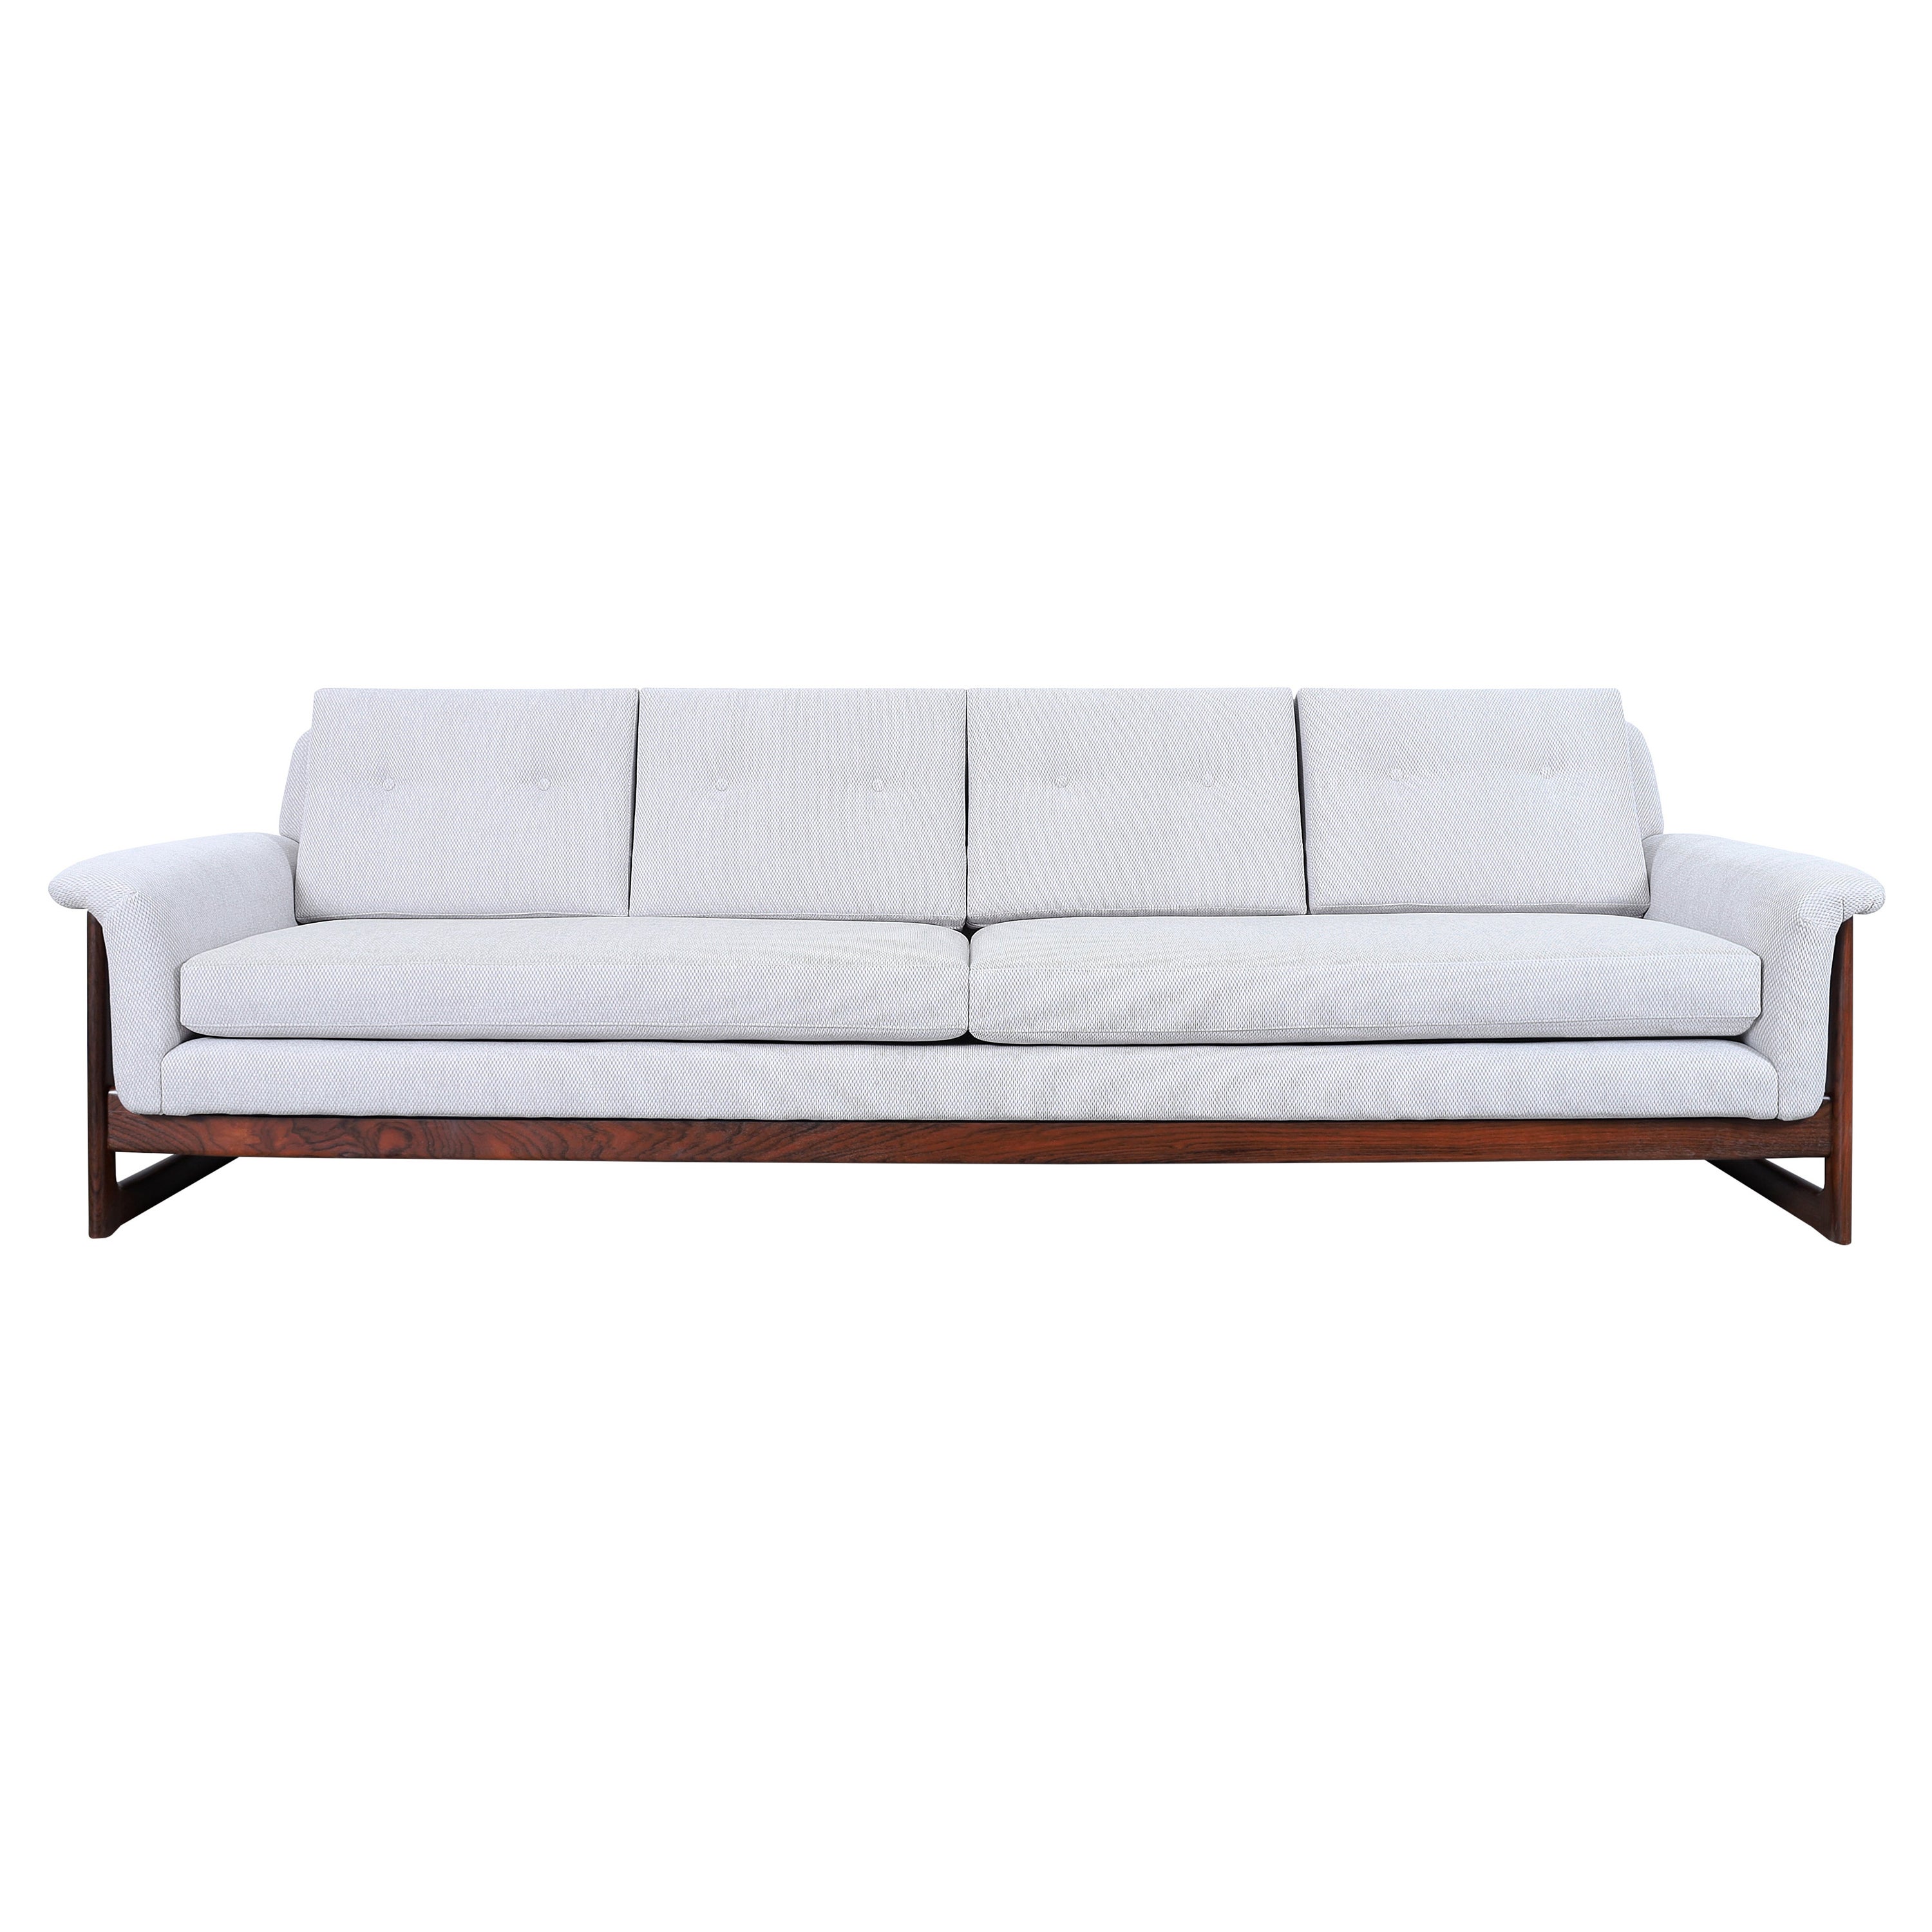 Swedish Rosewood Sofa by Folke Ohlsson for DUX